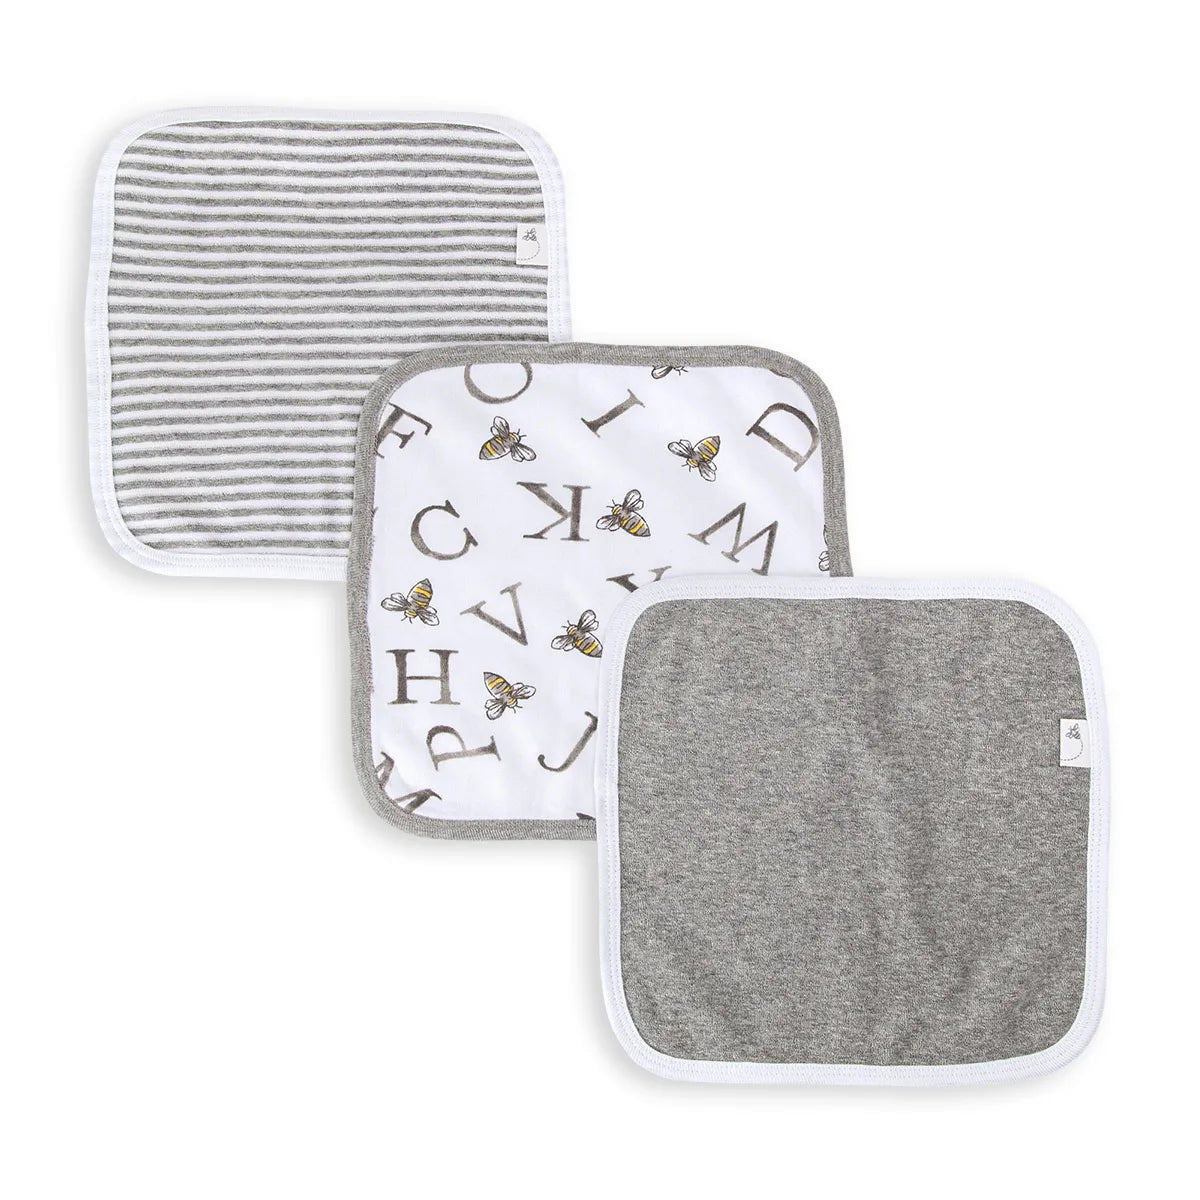 A-Bee-C Organic Cotton Washcloths-3 Pack